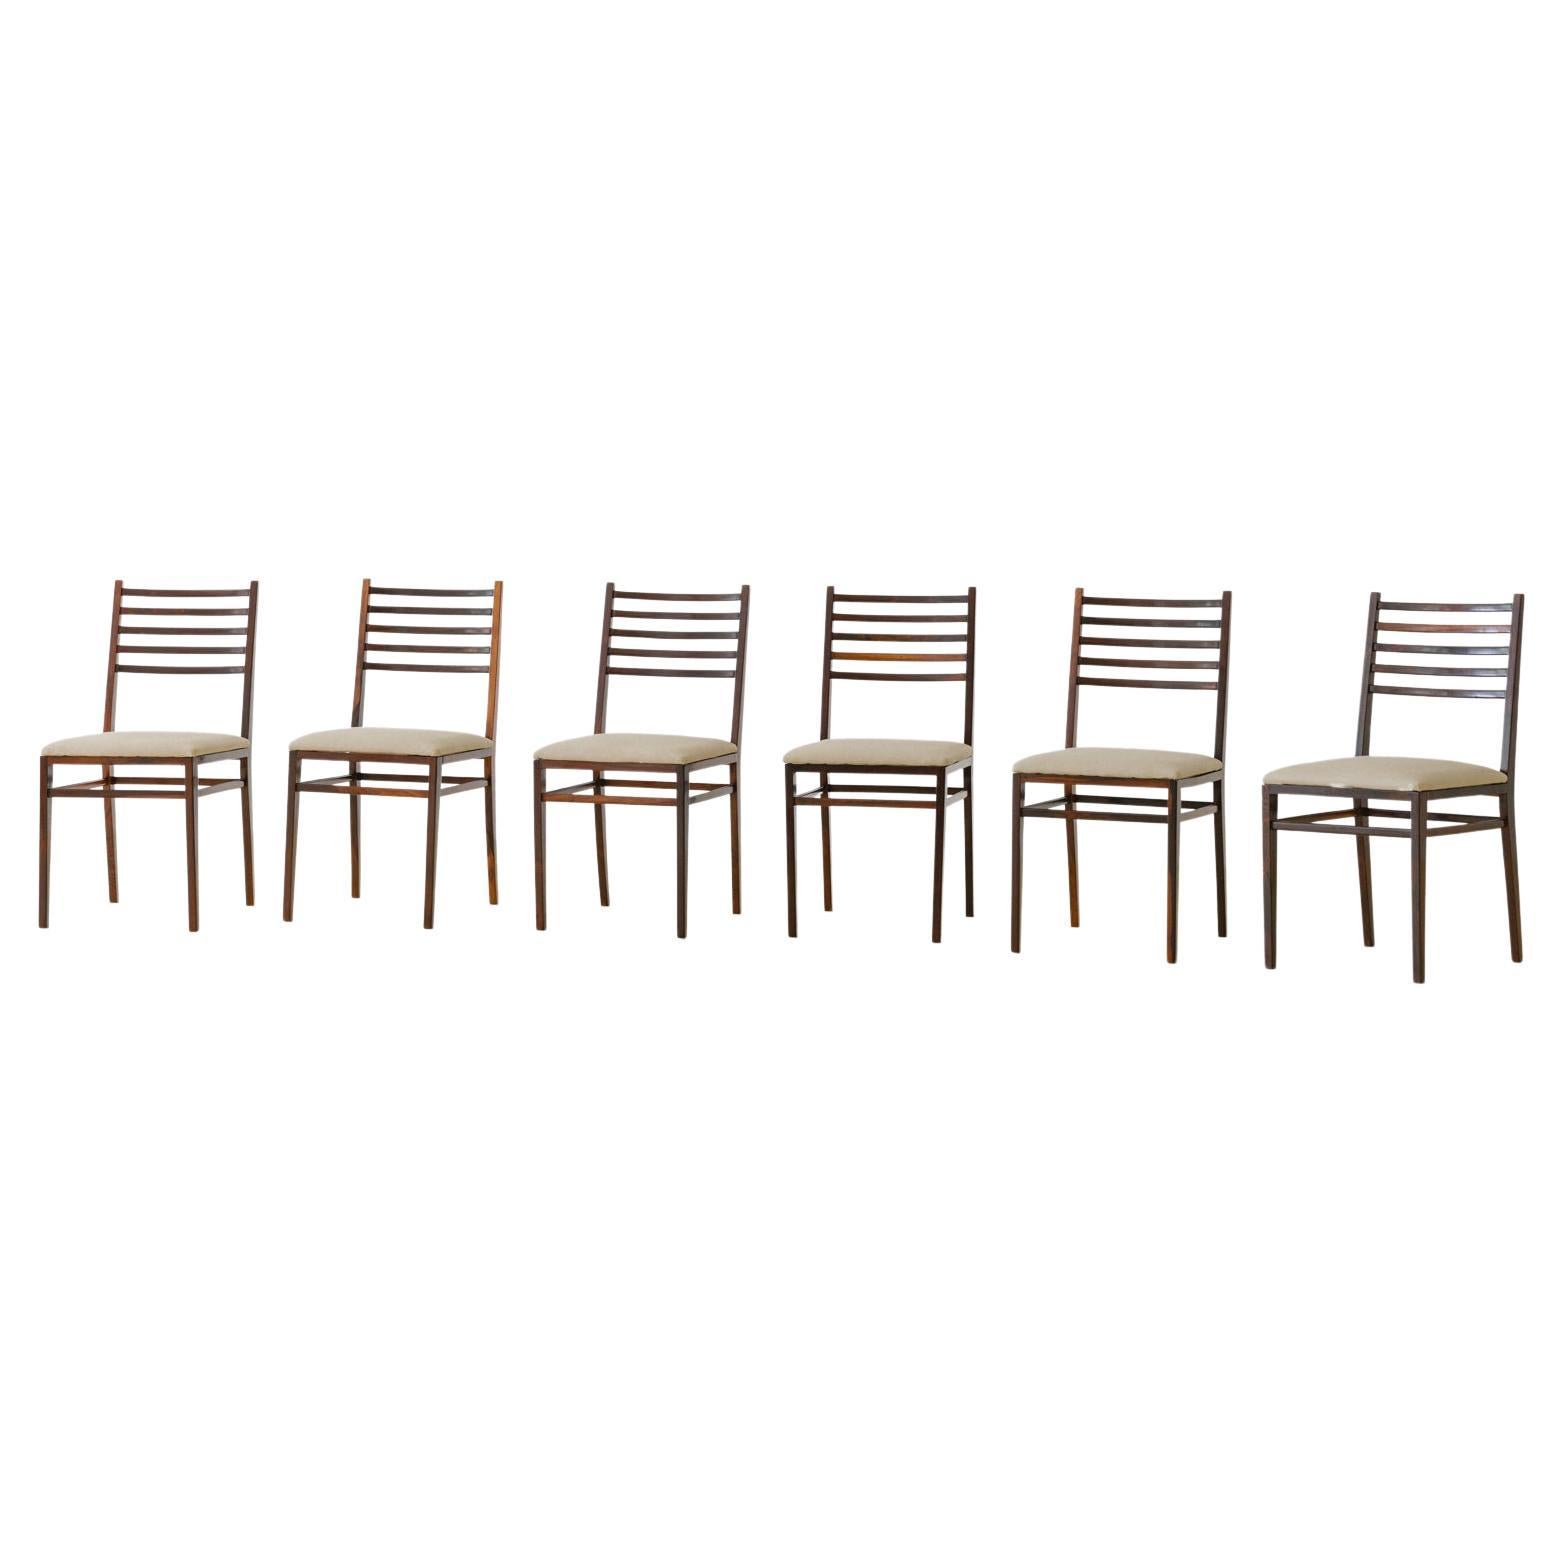 Set of Six Chairs in Rosewood, Model 4015 by Geraldo de Barros, Unilabor, 1950s For Sale